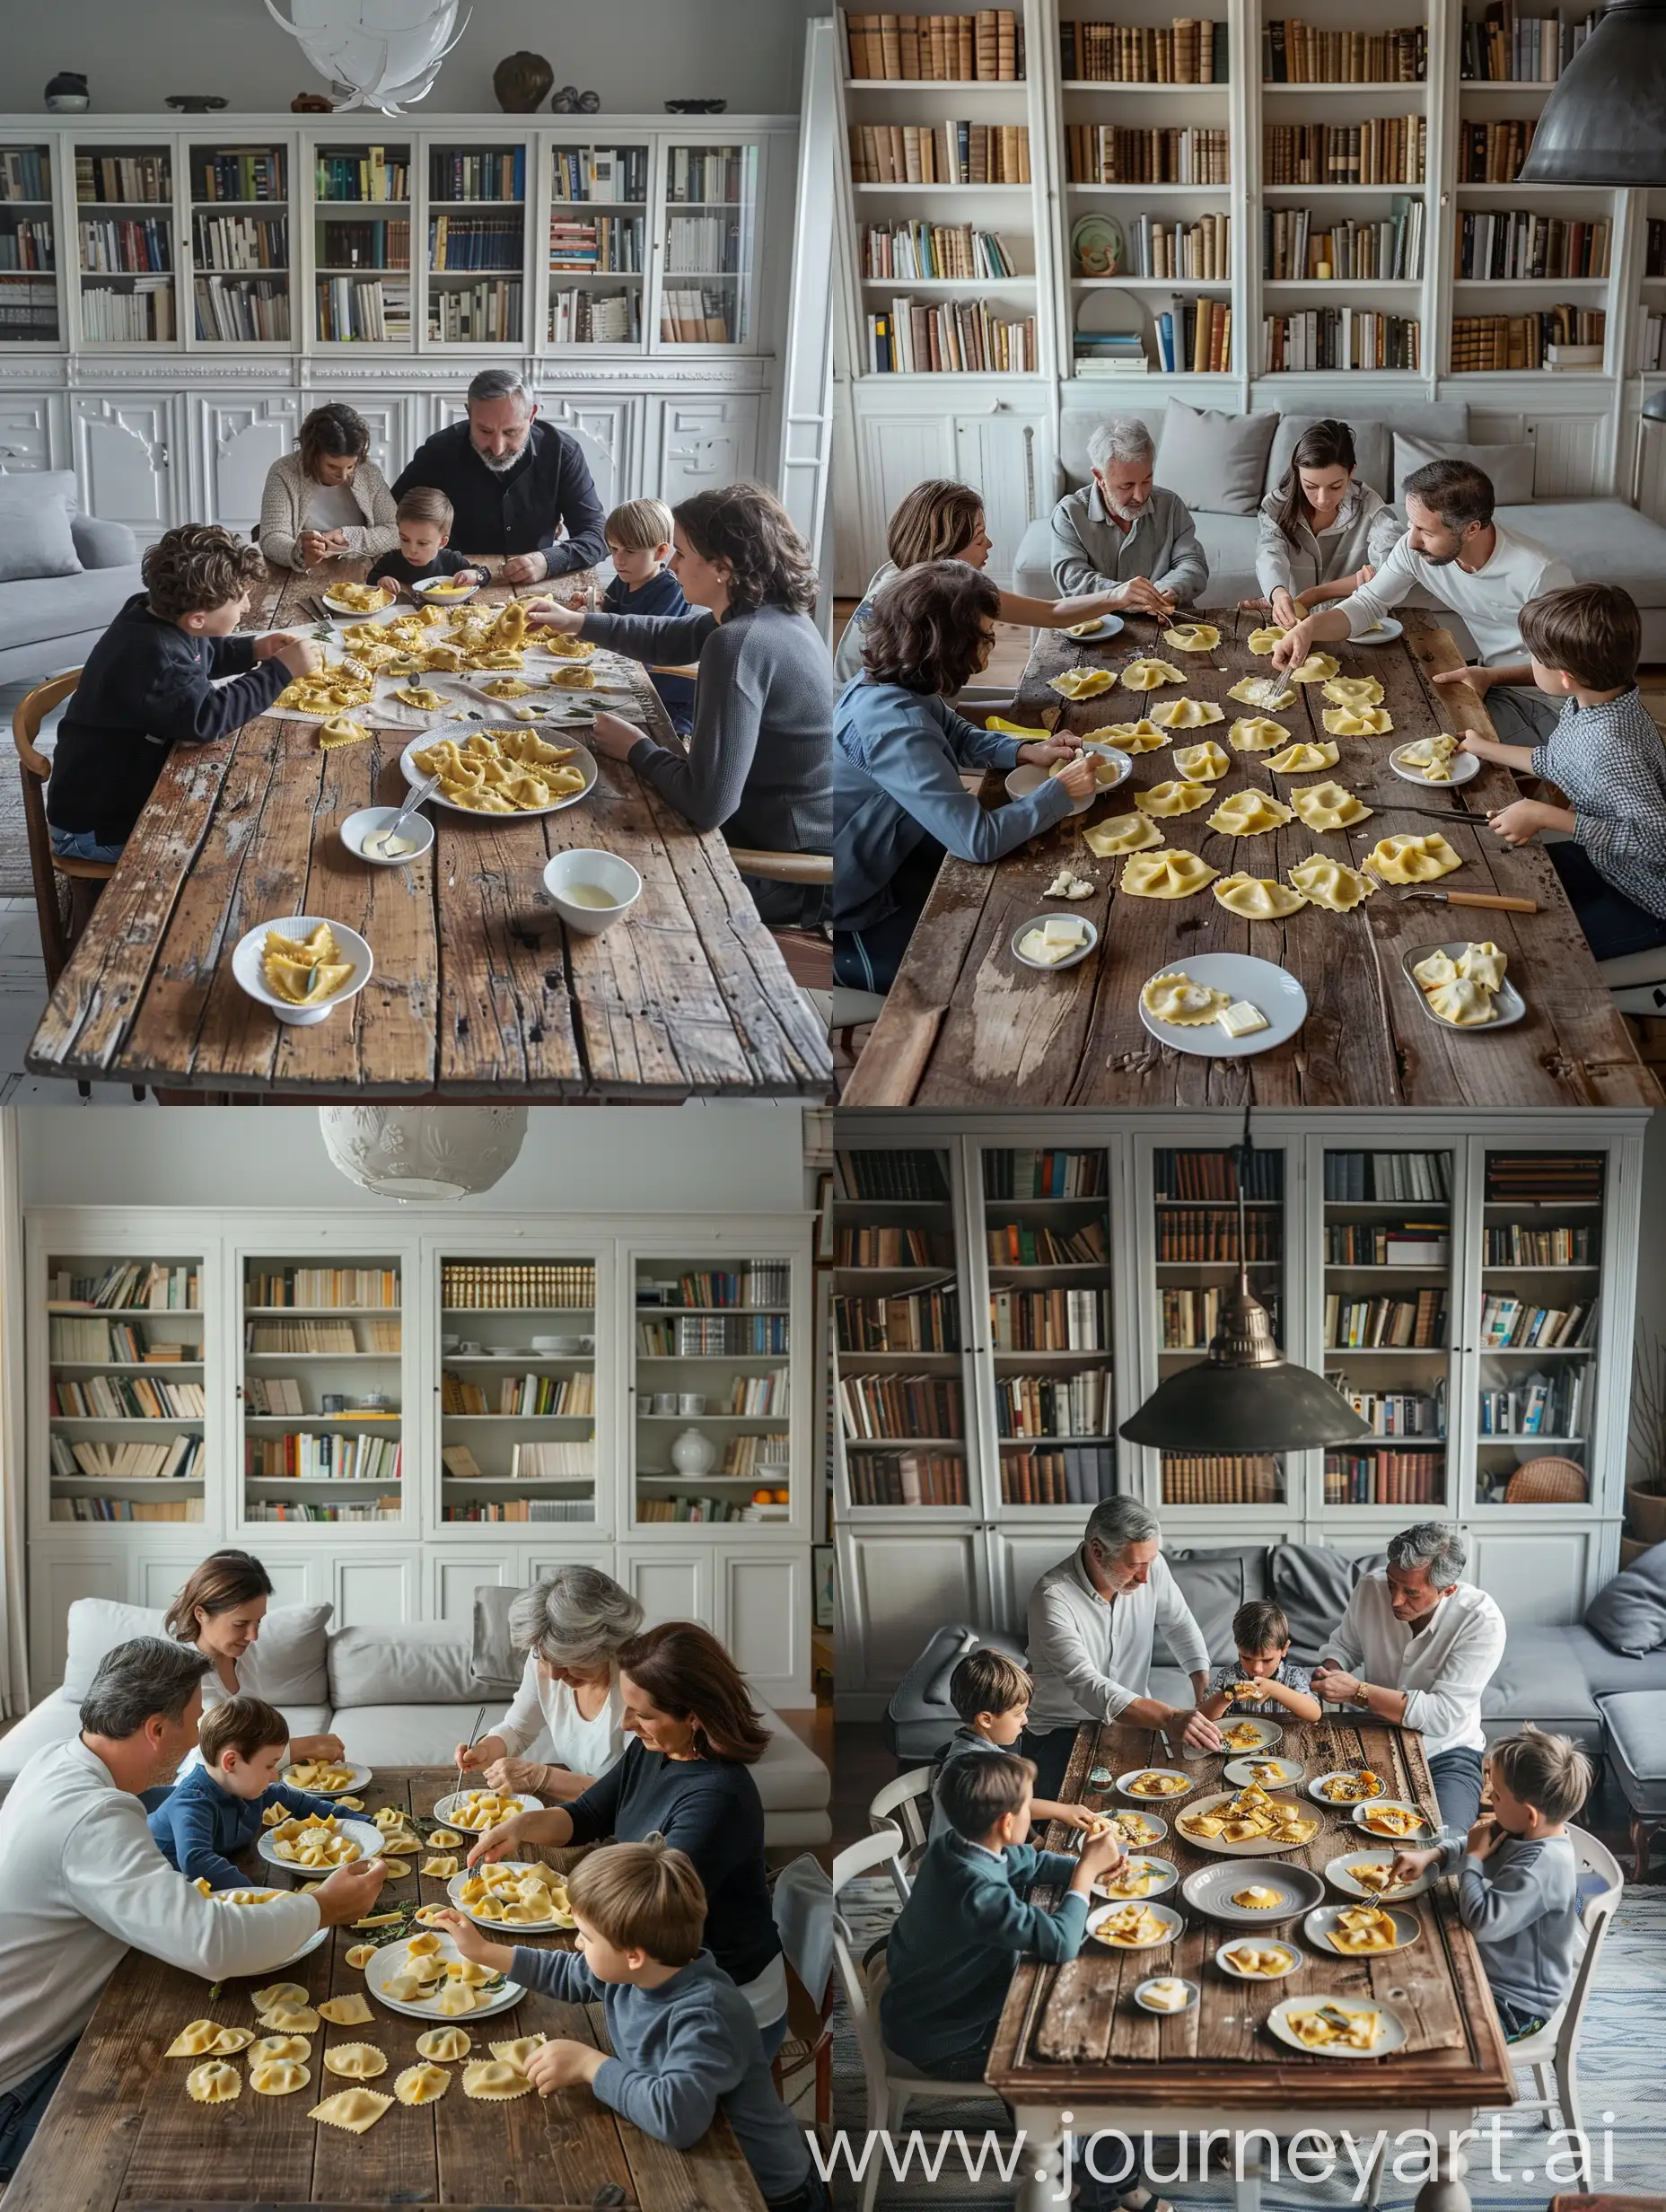 seven people are at dinner, two 50-year-old fathers, two 40-year-old mothers and three 8-year-old sons, they are sitting around an ancient wooden table, they are eating stuffed ravioli seasoned with butter and sage, in the room there is a three meter long white bookcase on the wall full of books, in the room there is a three-seater gray sofa with chaise longue, 8pm in the evening